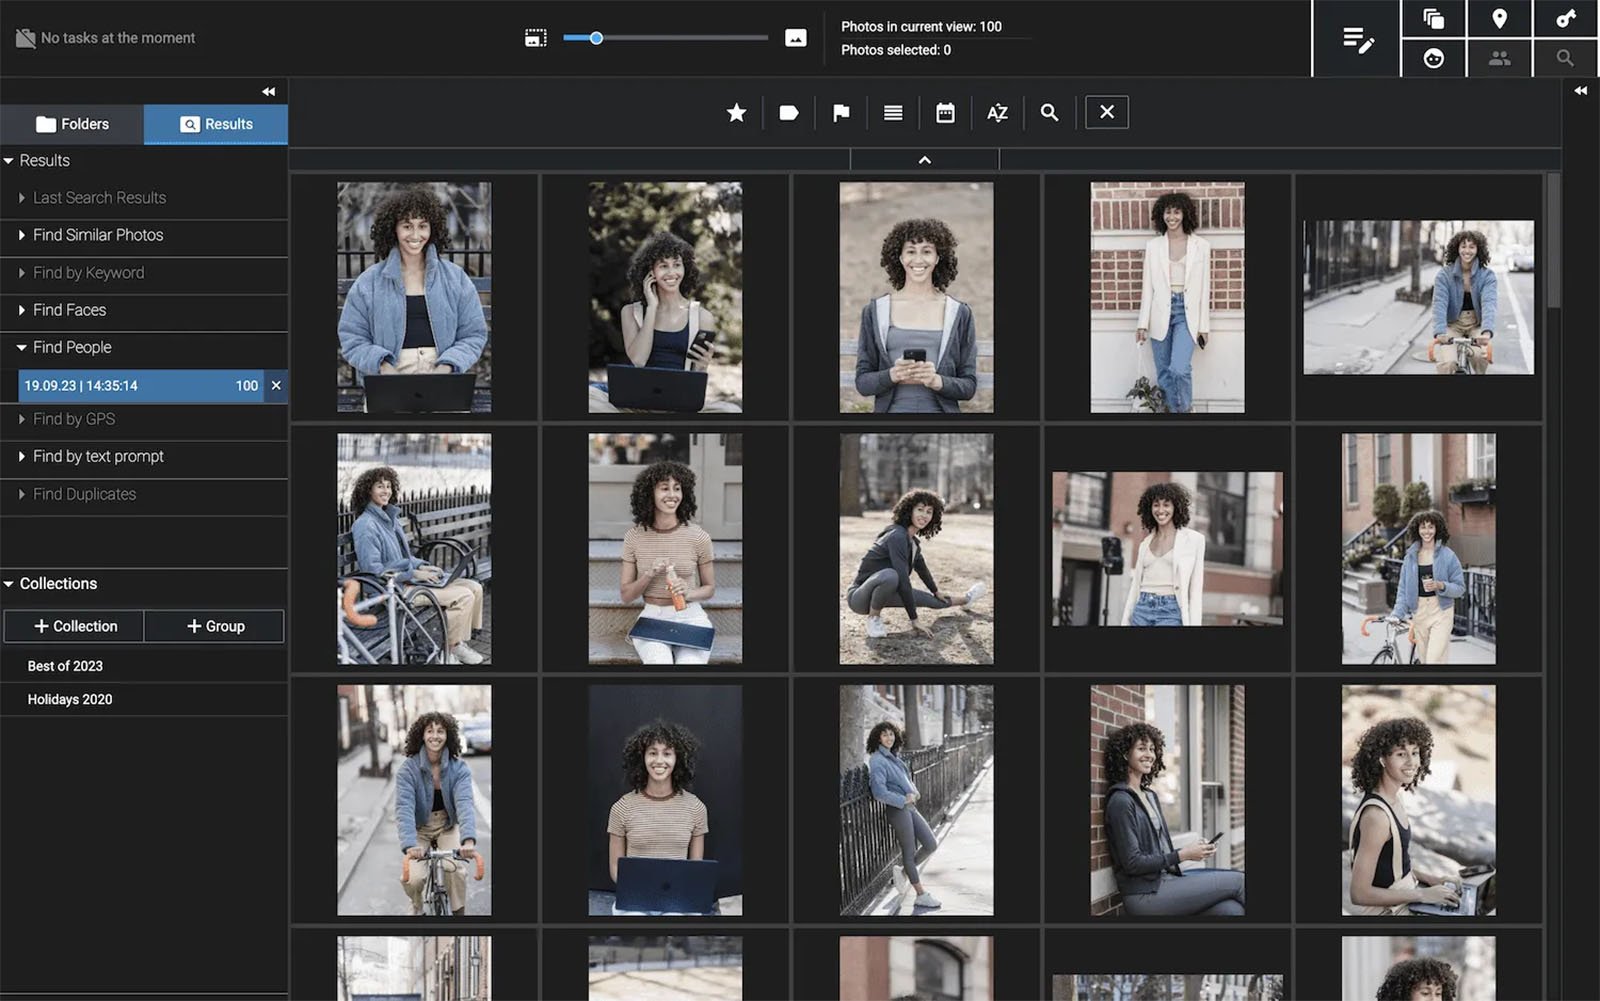 A digital image collection featuring multiple photos of a woman with curly hair in various urban settings, shown in different poses and activities like walking, sitting, and using a laptop.